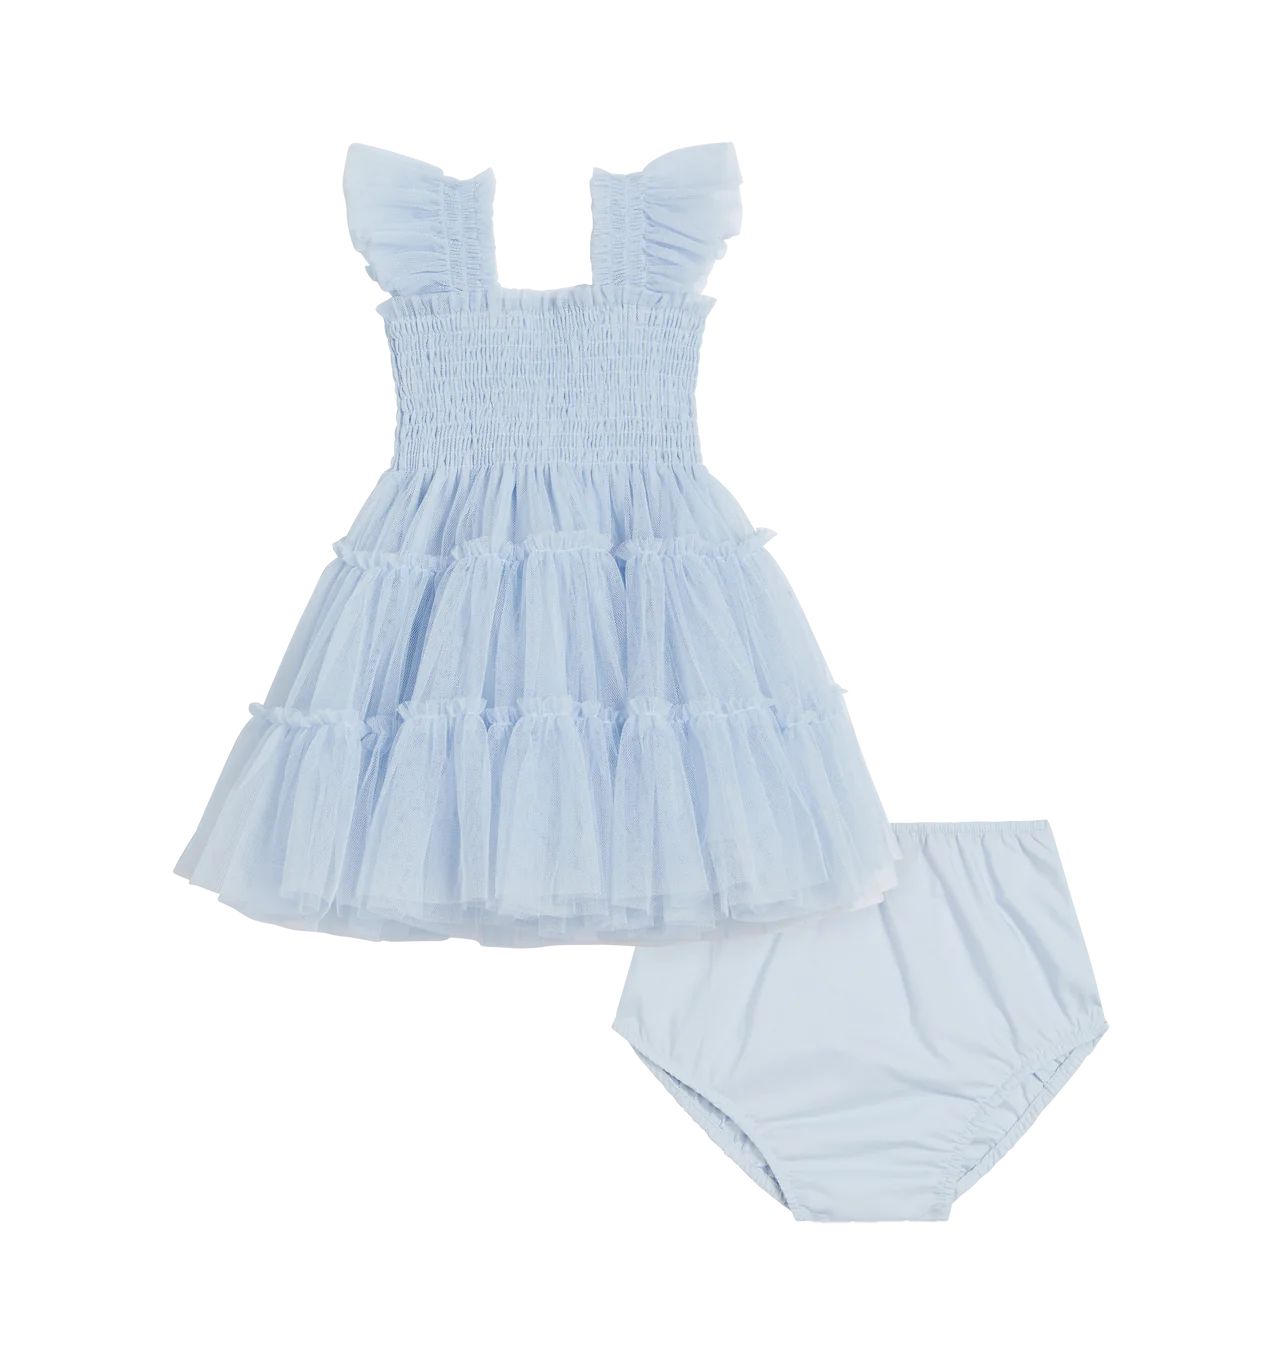 The Baby Tulle Ellie Nap Dress - Powder Blue Tulle | Hill House Home